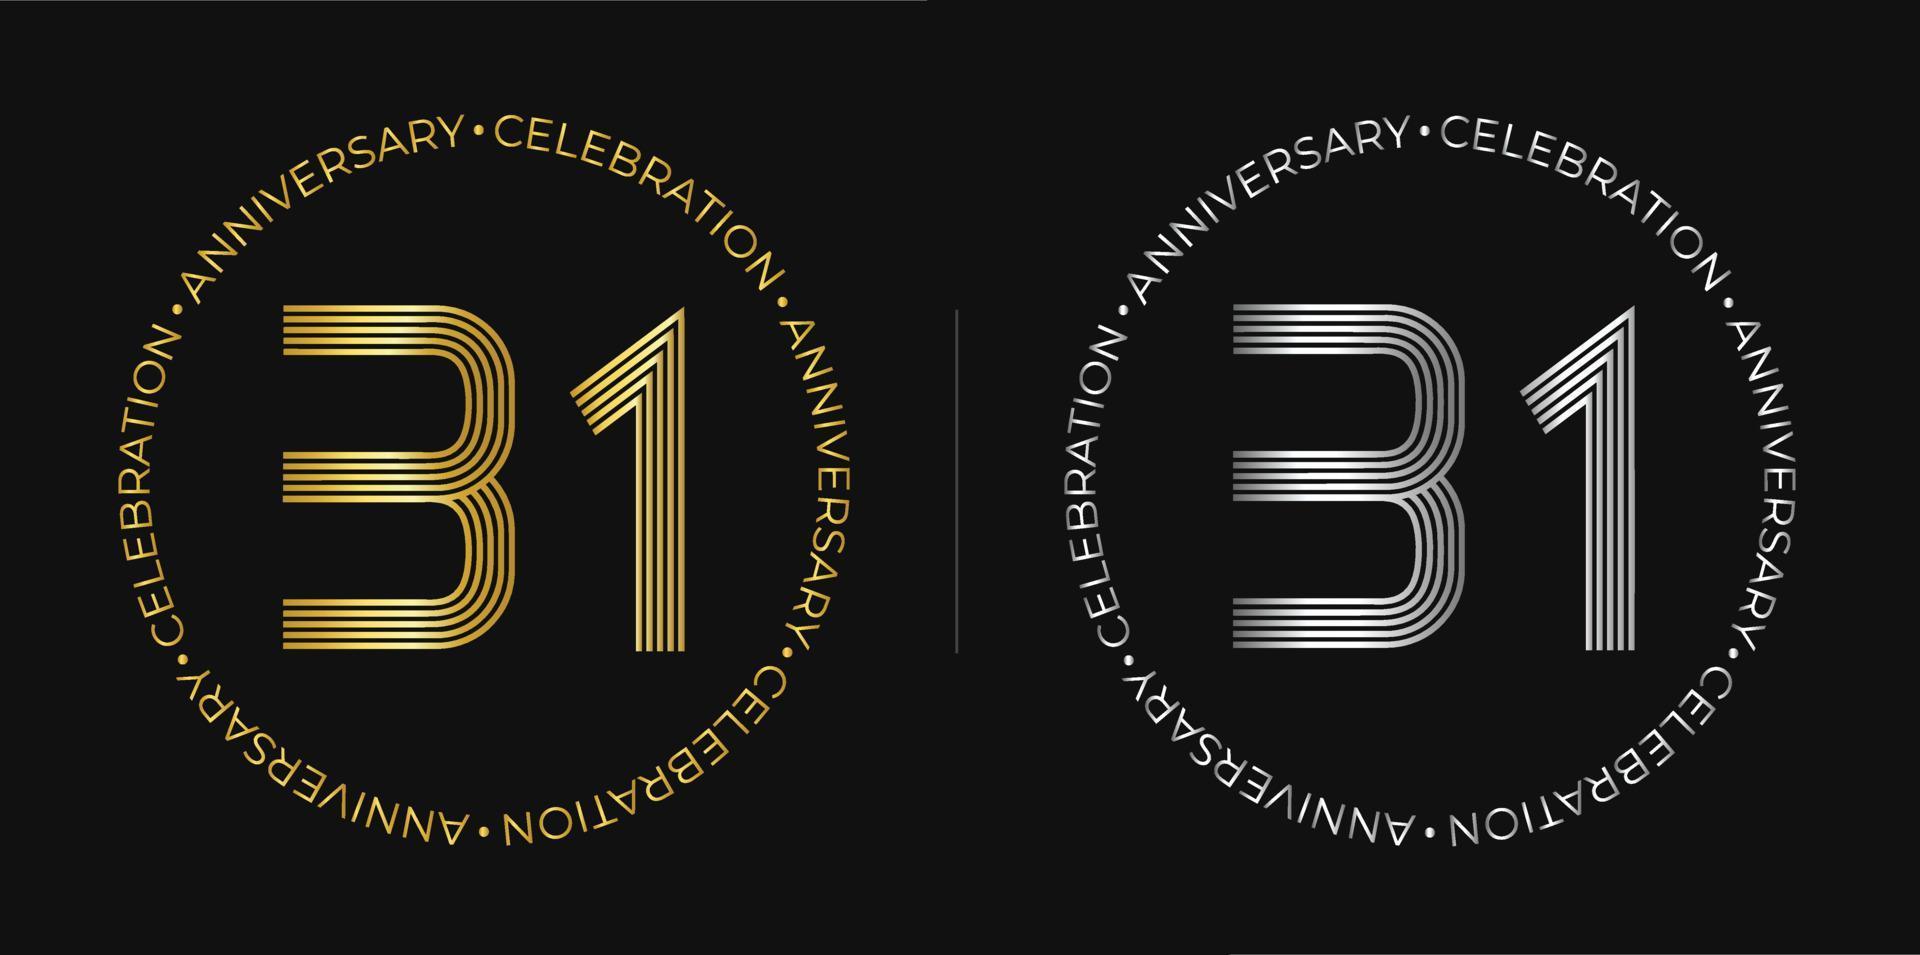 31th birthday. Thirty-one years anniversary celebration banner in golden and silver colors. Circular logo with original numbers design in elegant lines. vector